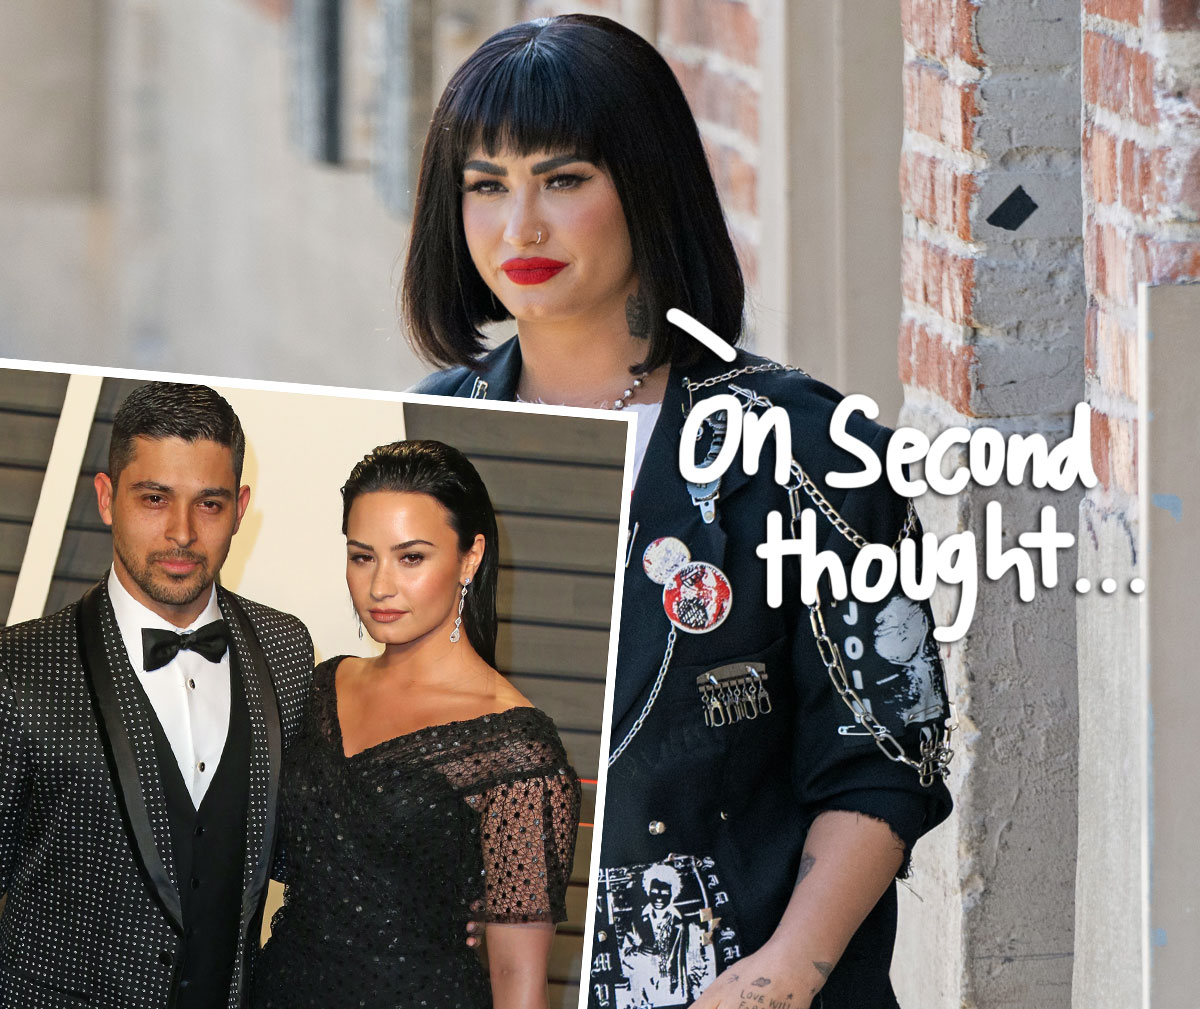 #Demi Lovato Seemingly CALLS OUT Ex Wilmer Valderrama For Their 12-Year-Age Gap In Diss Track!!